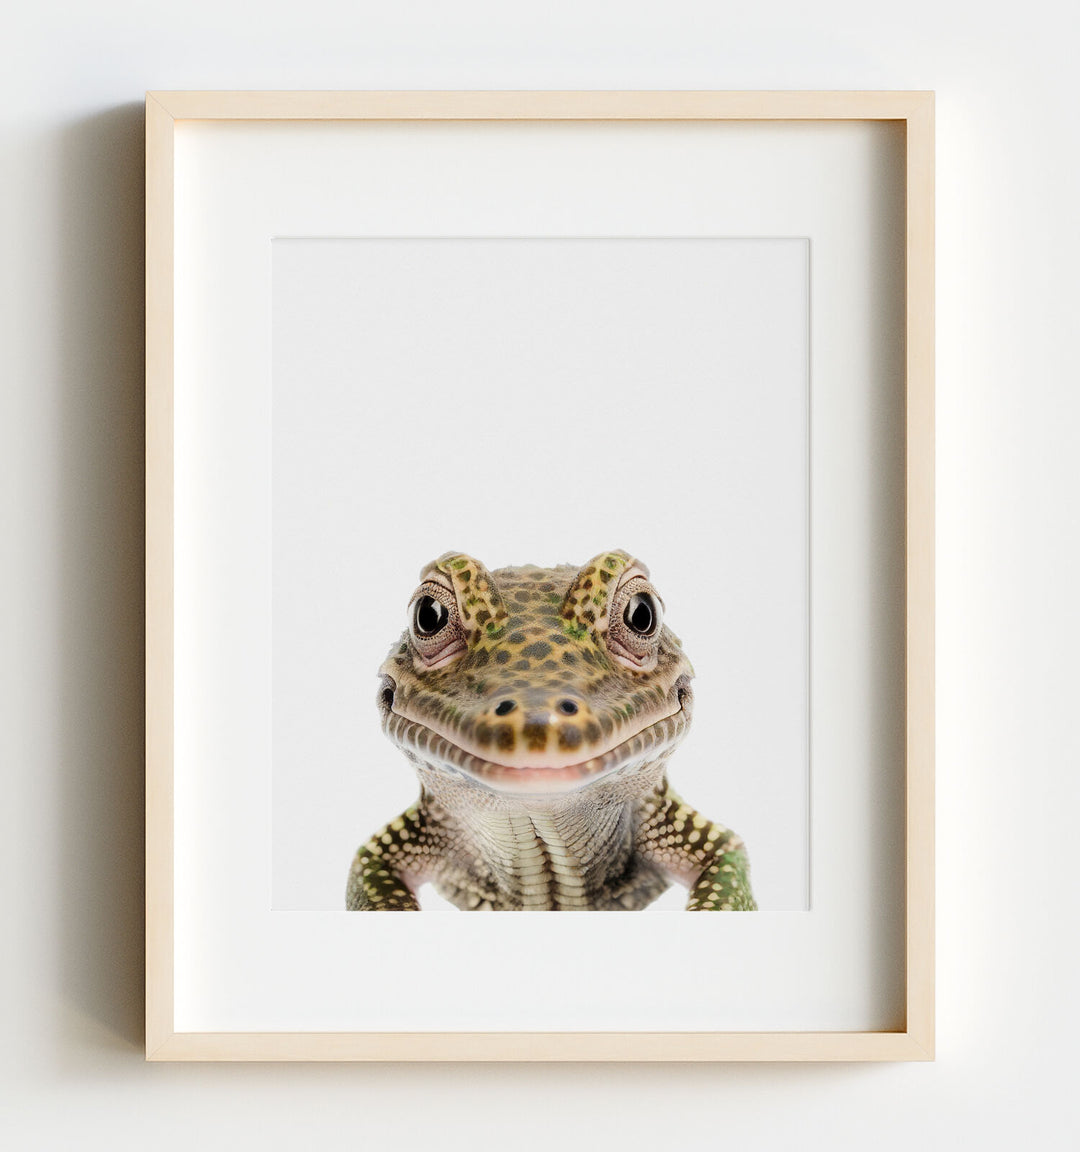 Baby Alligator Art Print Poster by The Crown Prints